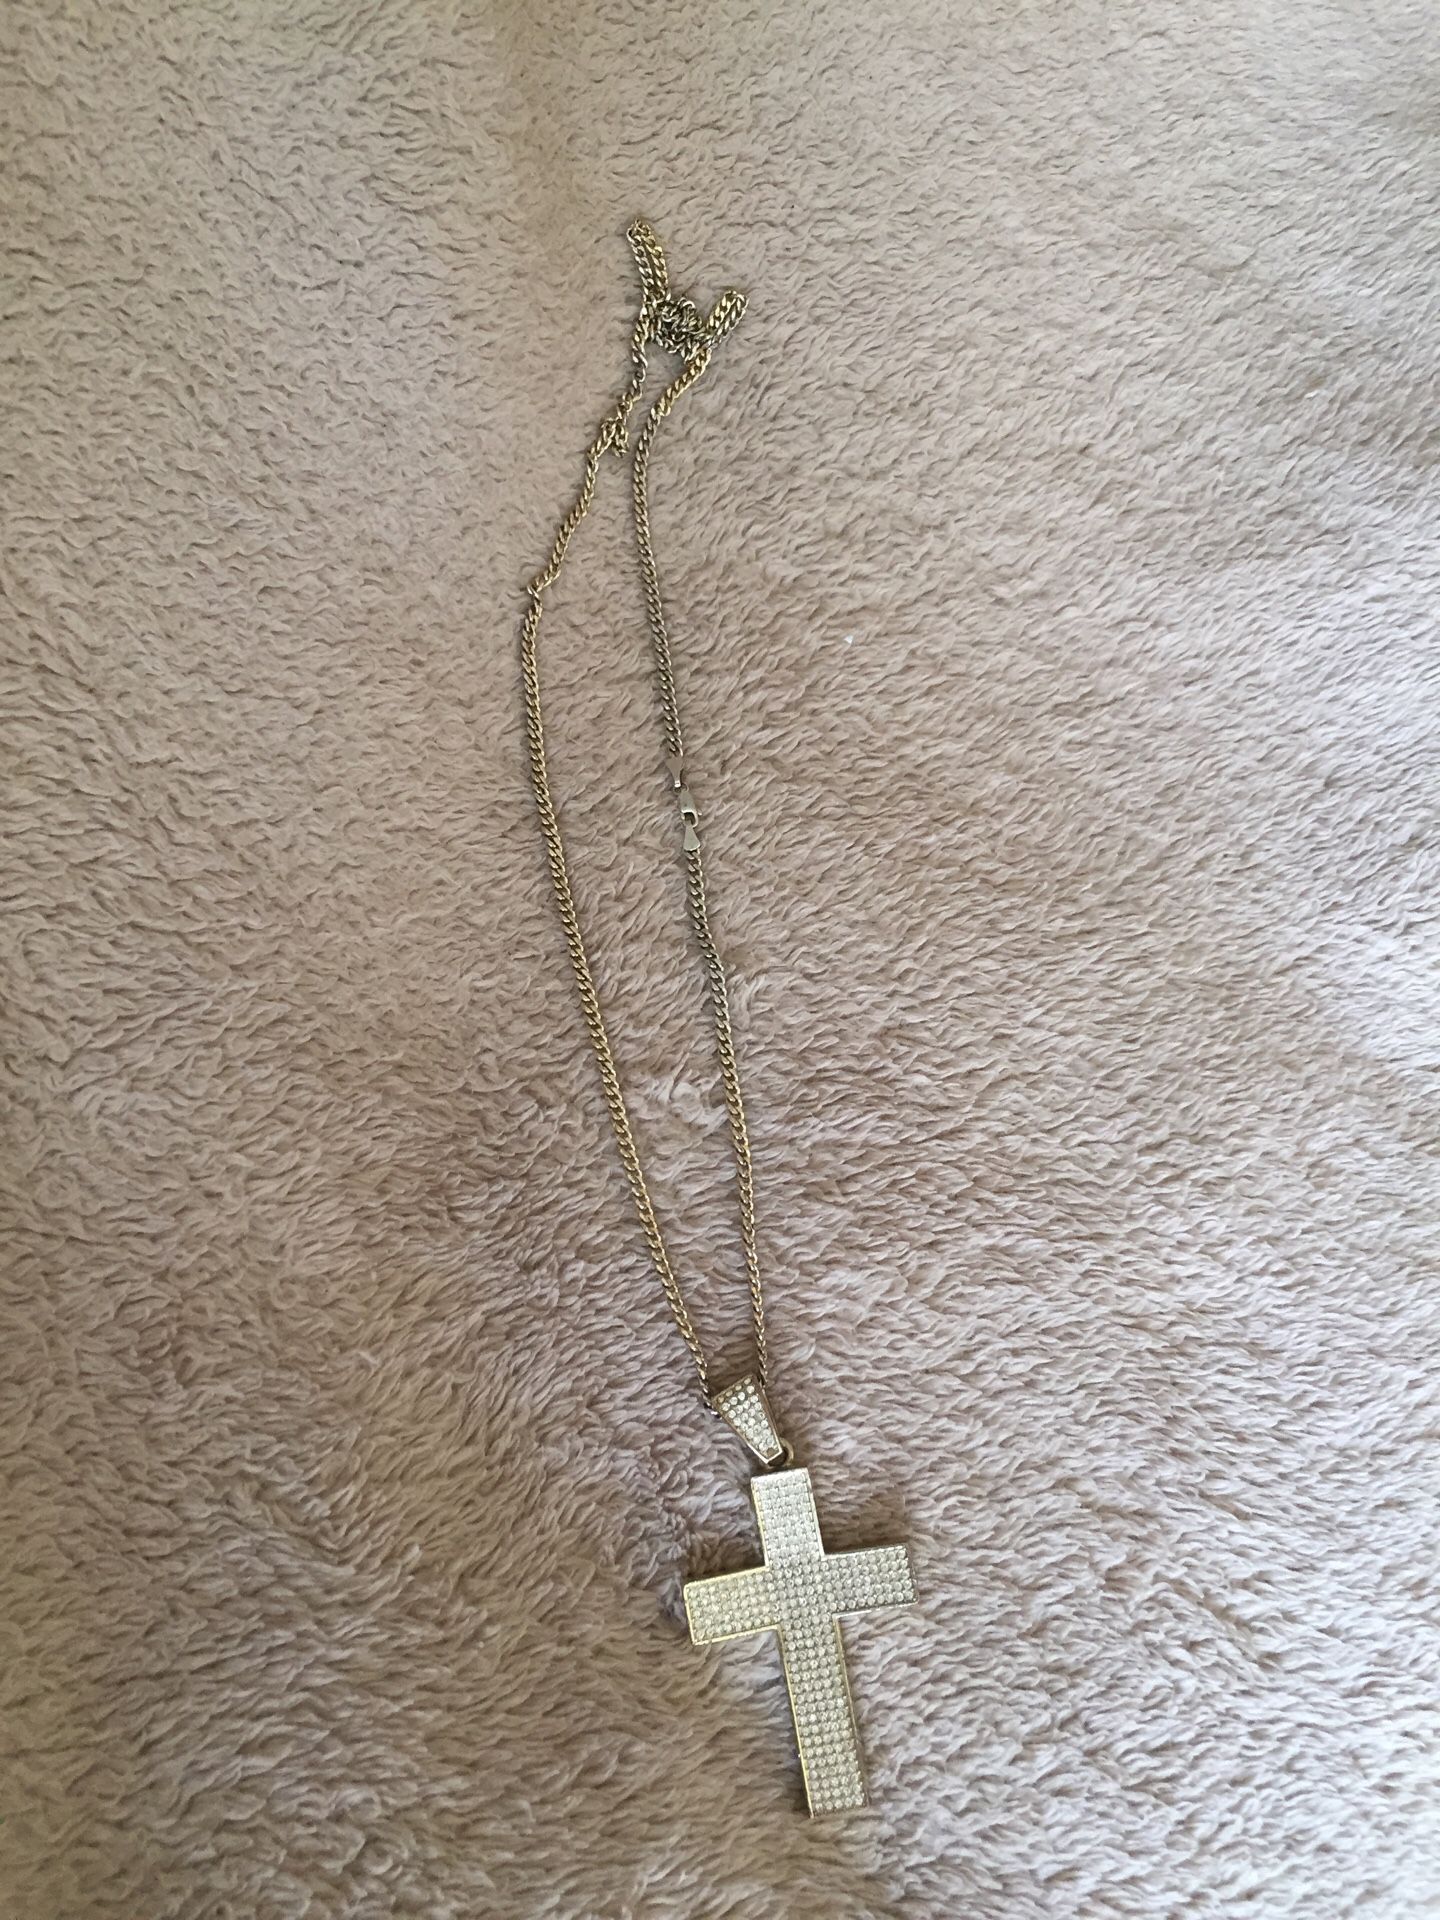 $40 Gold Plated Cross Chain